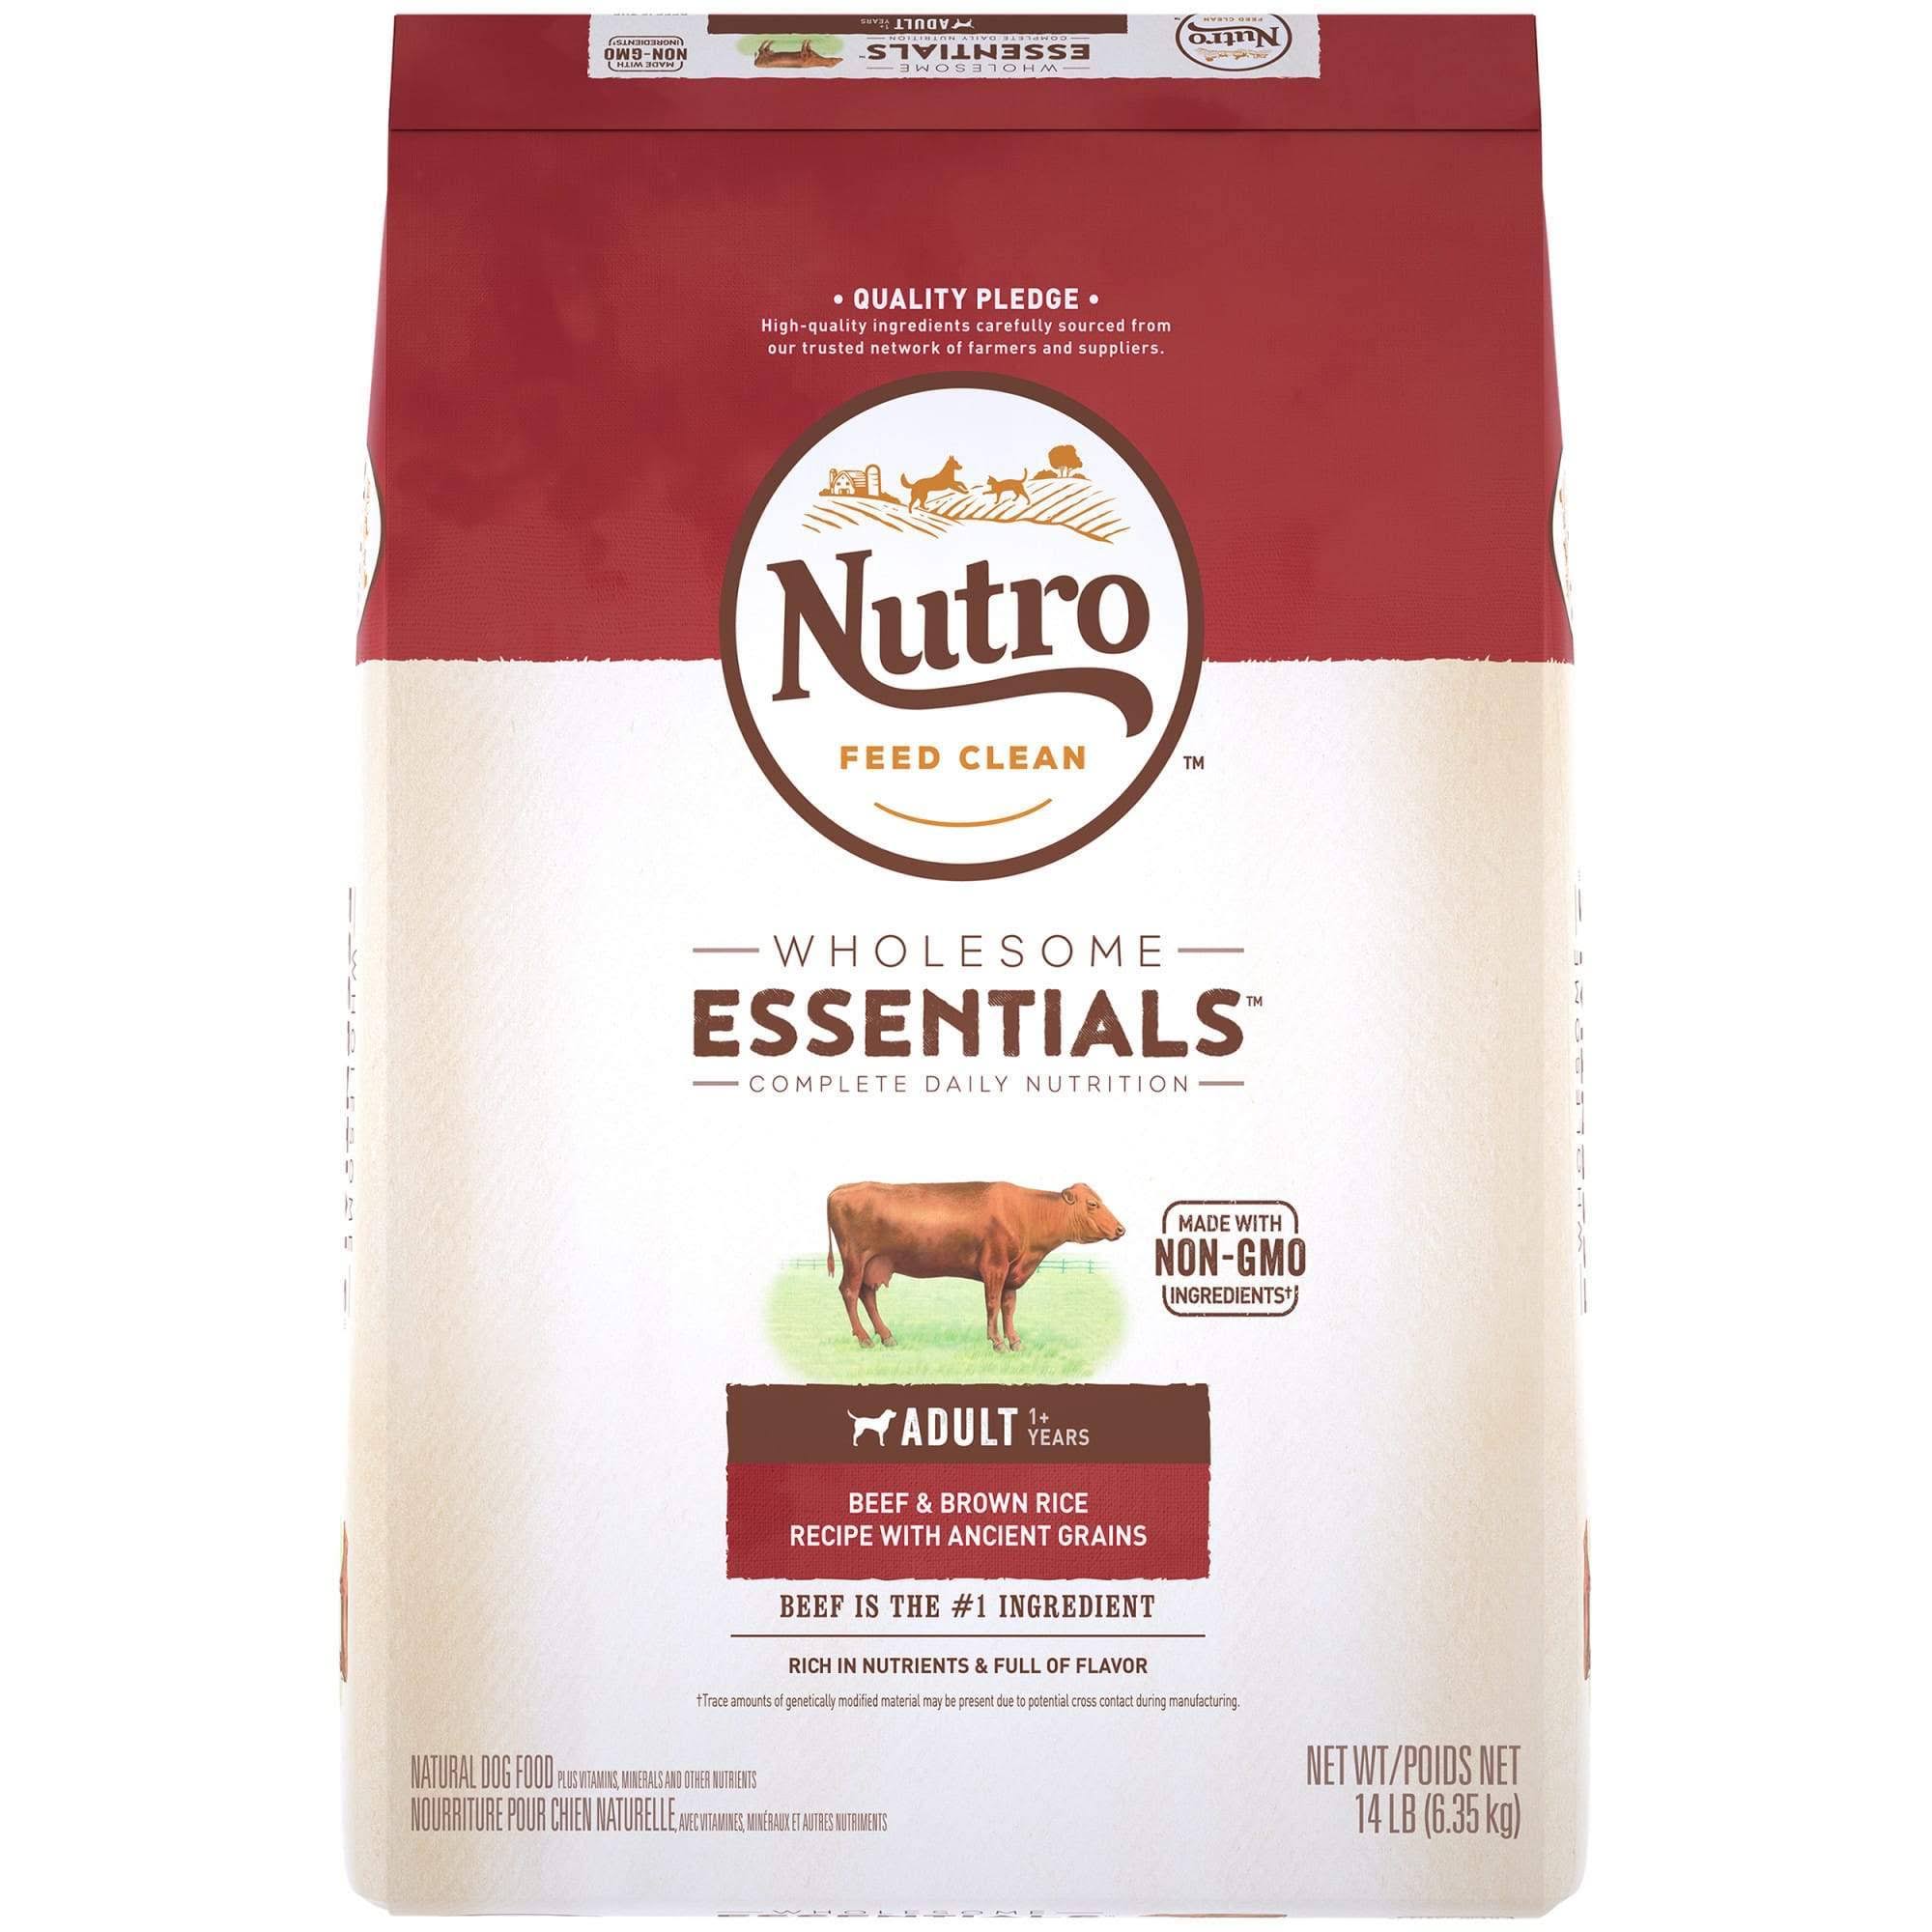 Nutro Wholesome Essentials Adult Dry Dog Food, Beef & Brown Rice Recipe with Ancient Grains, 13kg. Bag | General | Delivery guaranteed